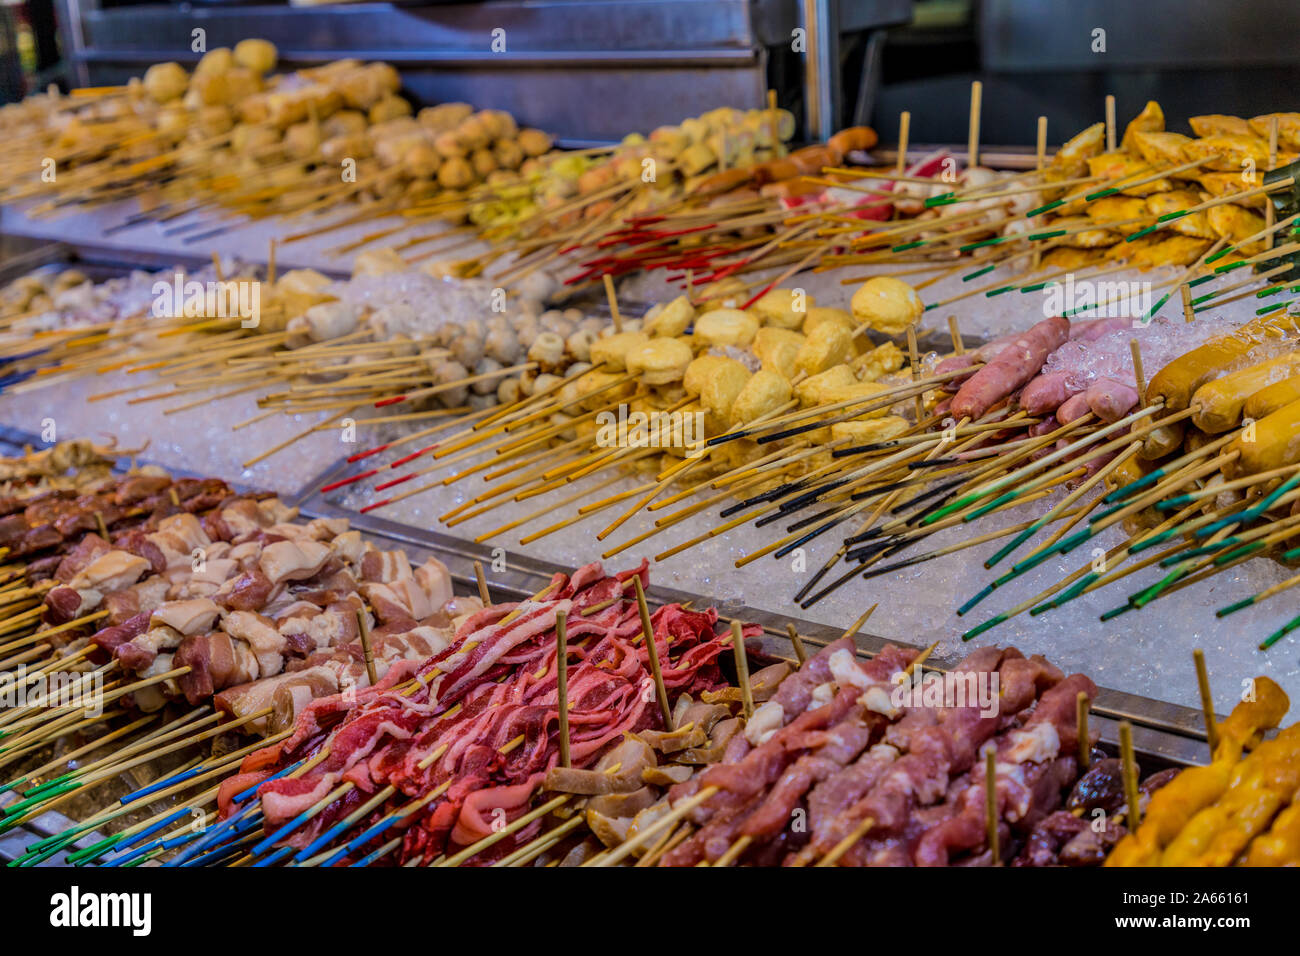 Luala Lumpur malaysia. March 16 2019. A view of a steam boat stall at the famous night food market Jalan Alor in Kuala Lumpur in Malaysia Stock Photo